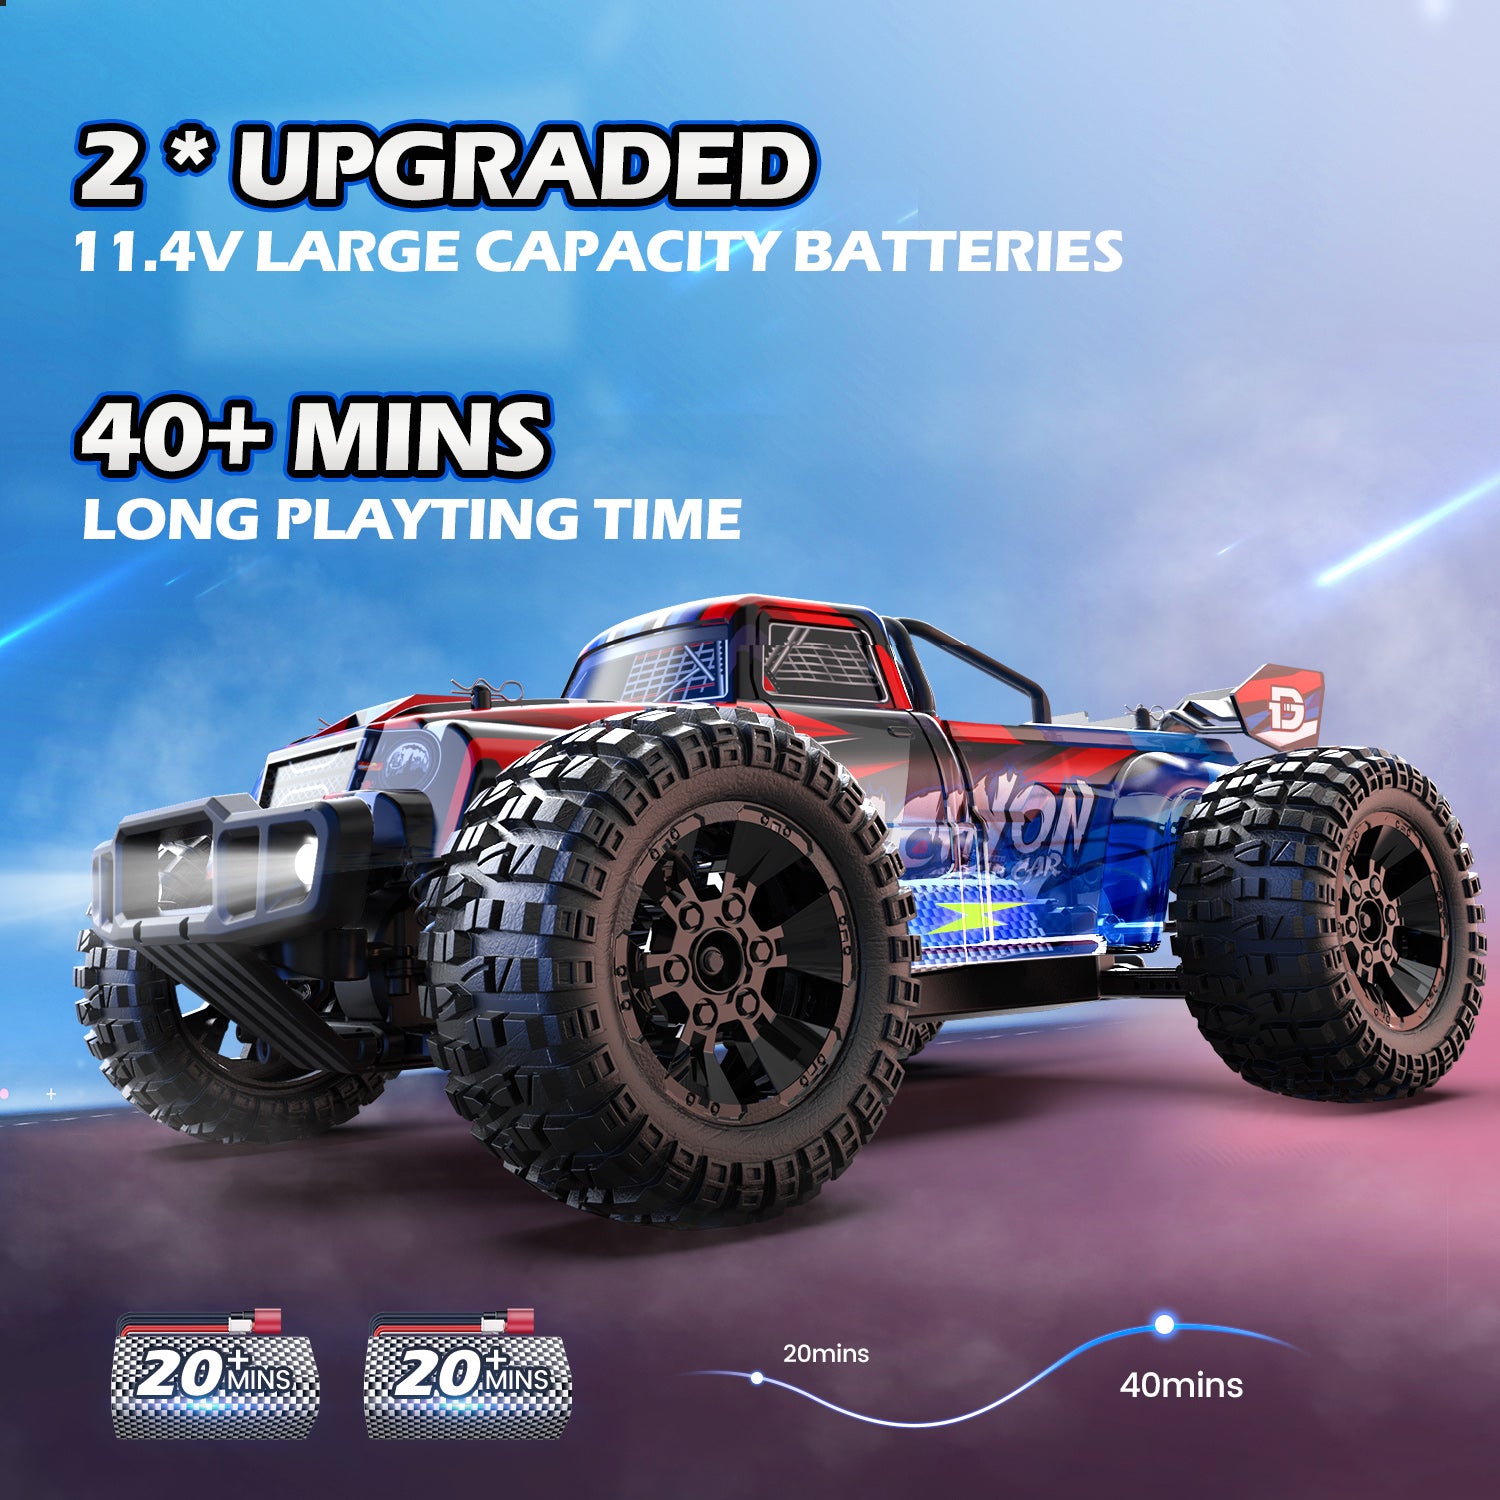 DEERC 1:10 Scale Fast Brushless RC Car for Adults, 4WD High Speed RC Monster Truck, 60+ KMH, All Terrain 2.4Ghz Hobby RC Truck, Off-Road Remote Control Vehicle, 40+ min Play, RC Crawler Gift for Boys